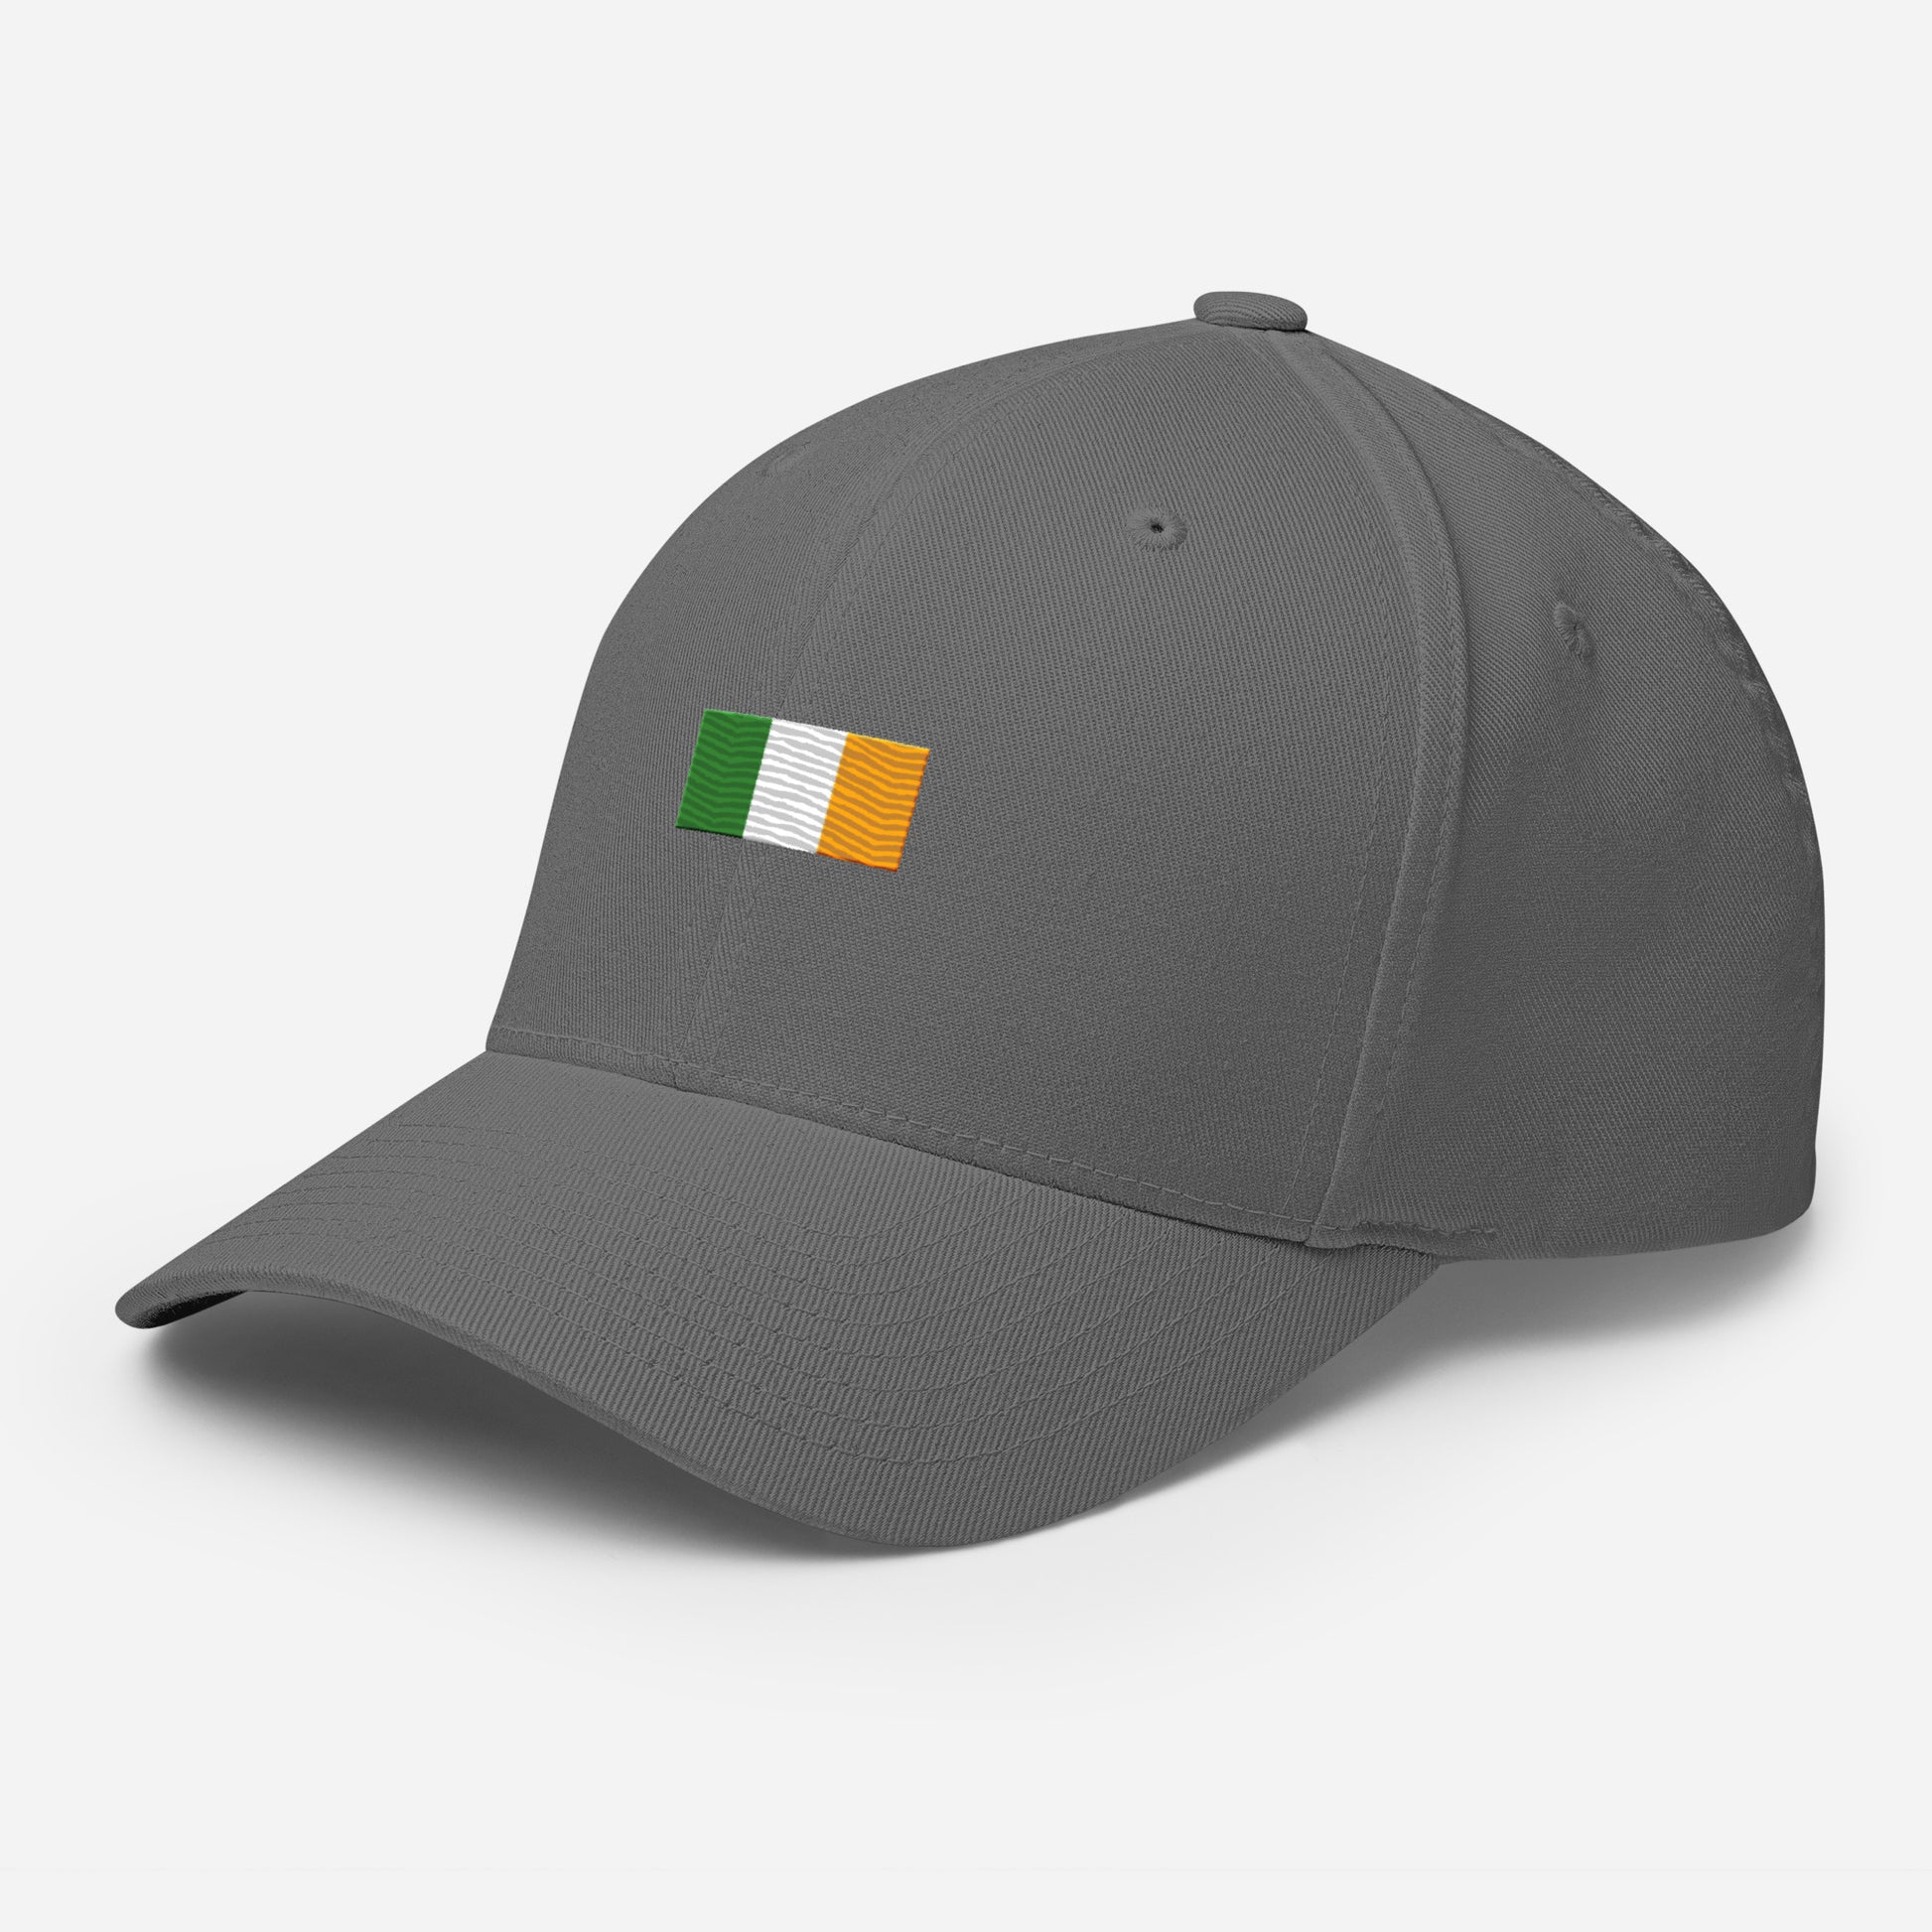 cap-from-the-front-with-irish-flag